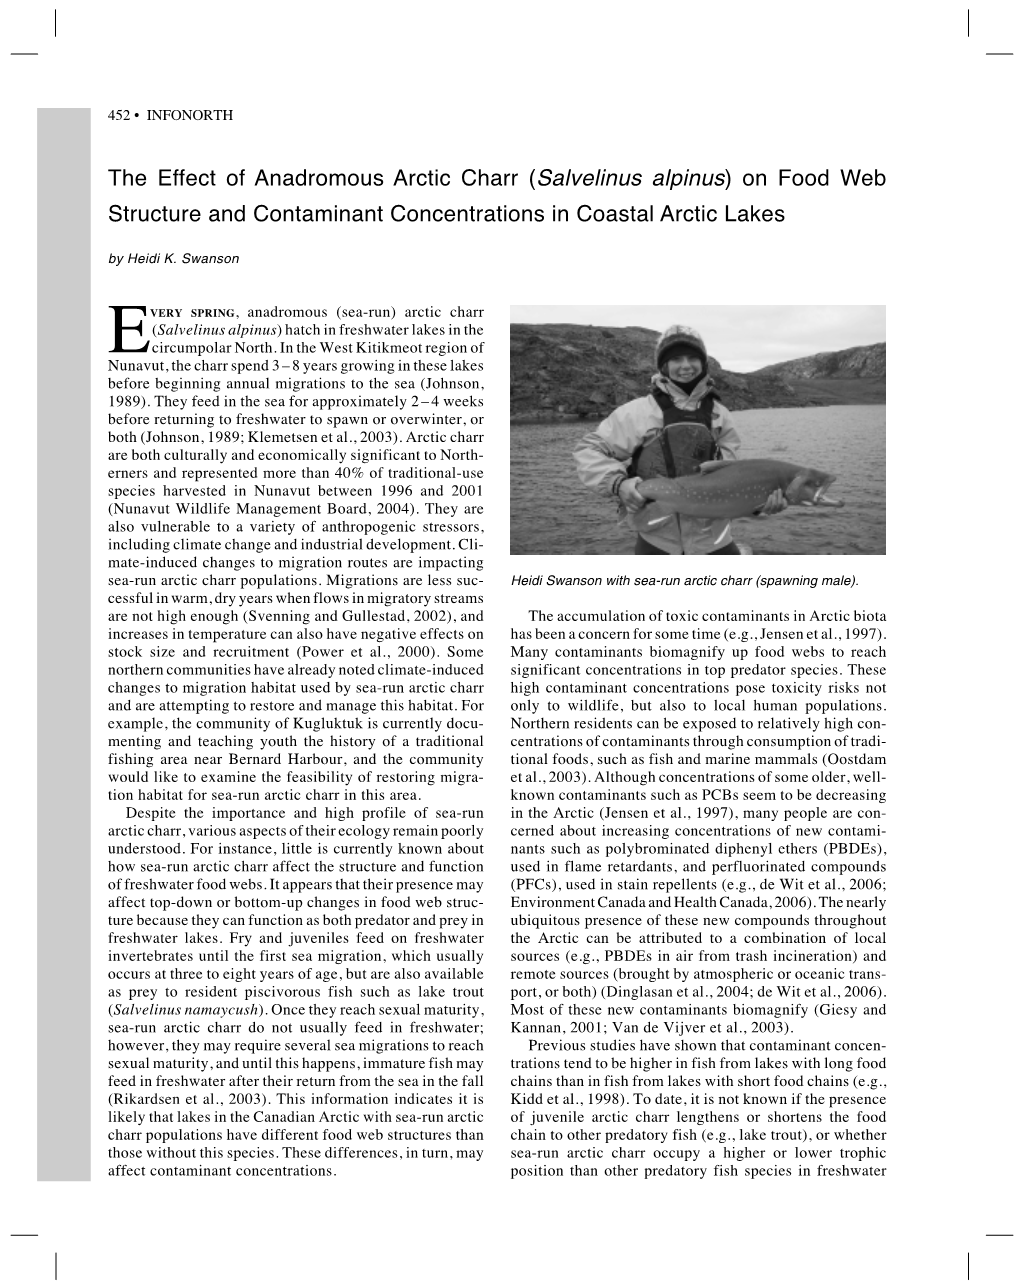 The Effect of Anadromous Arctic Charr (Salvelinus Alpinus) on Food Web Structure and Contaminant Concentrations in Coastal Arctic Lakes by Heidi K